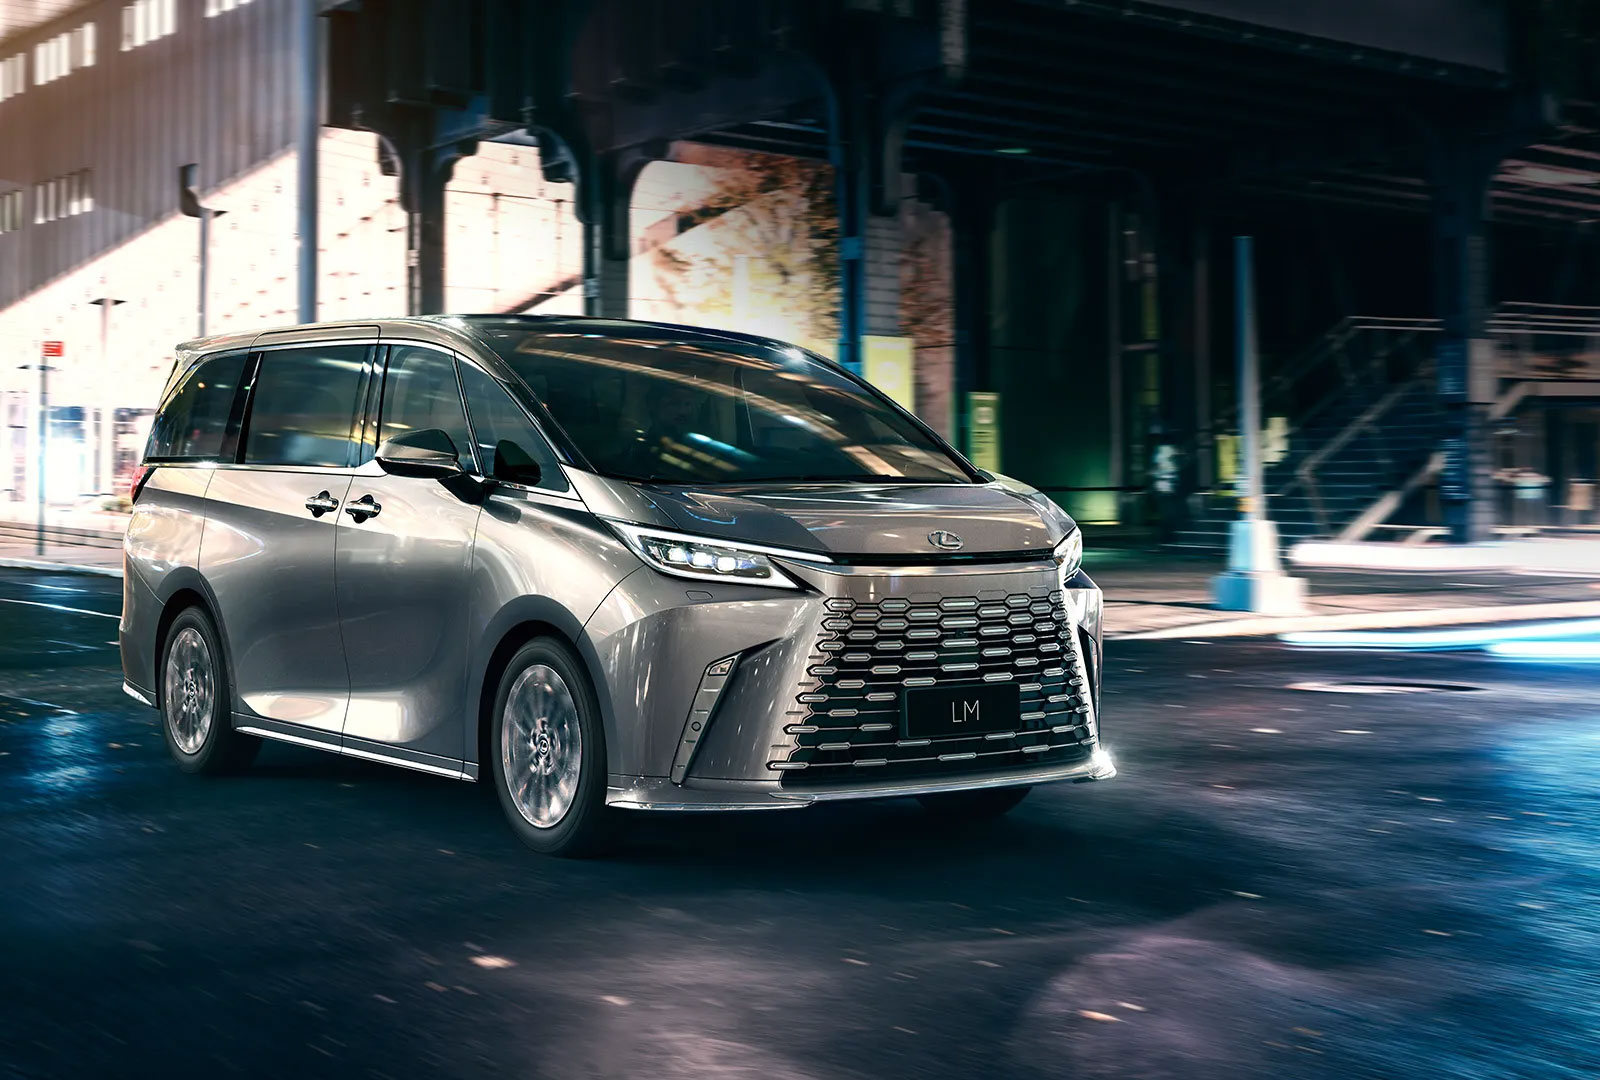 NEW GENERATION OF THE LEXUS SPINDLE GRILLE